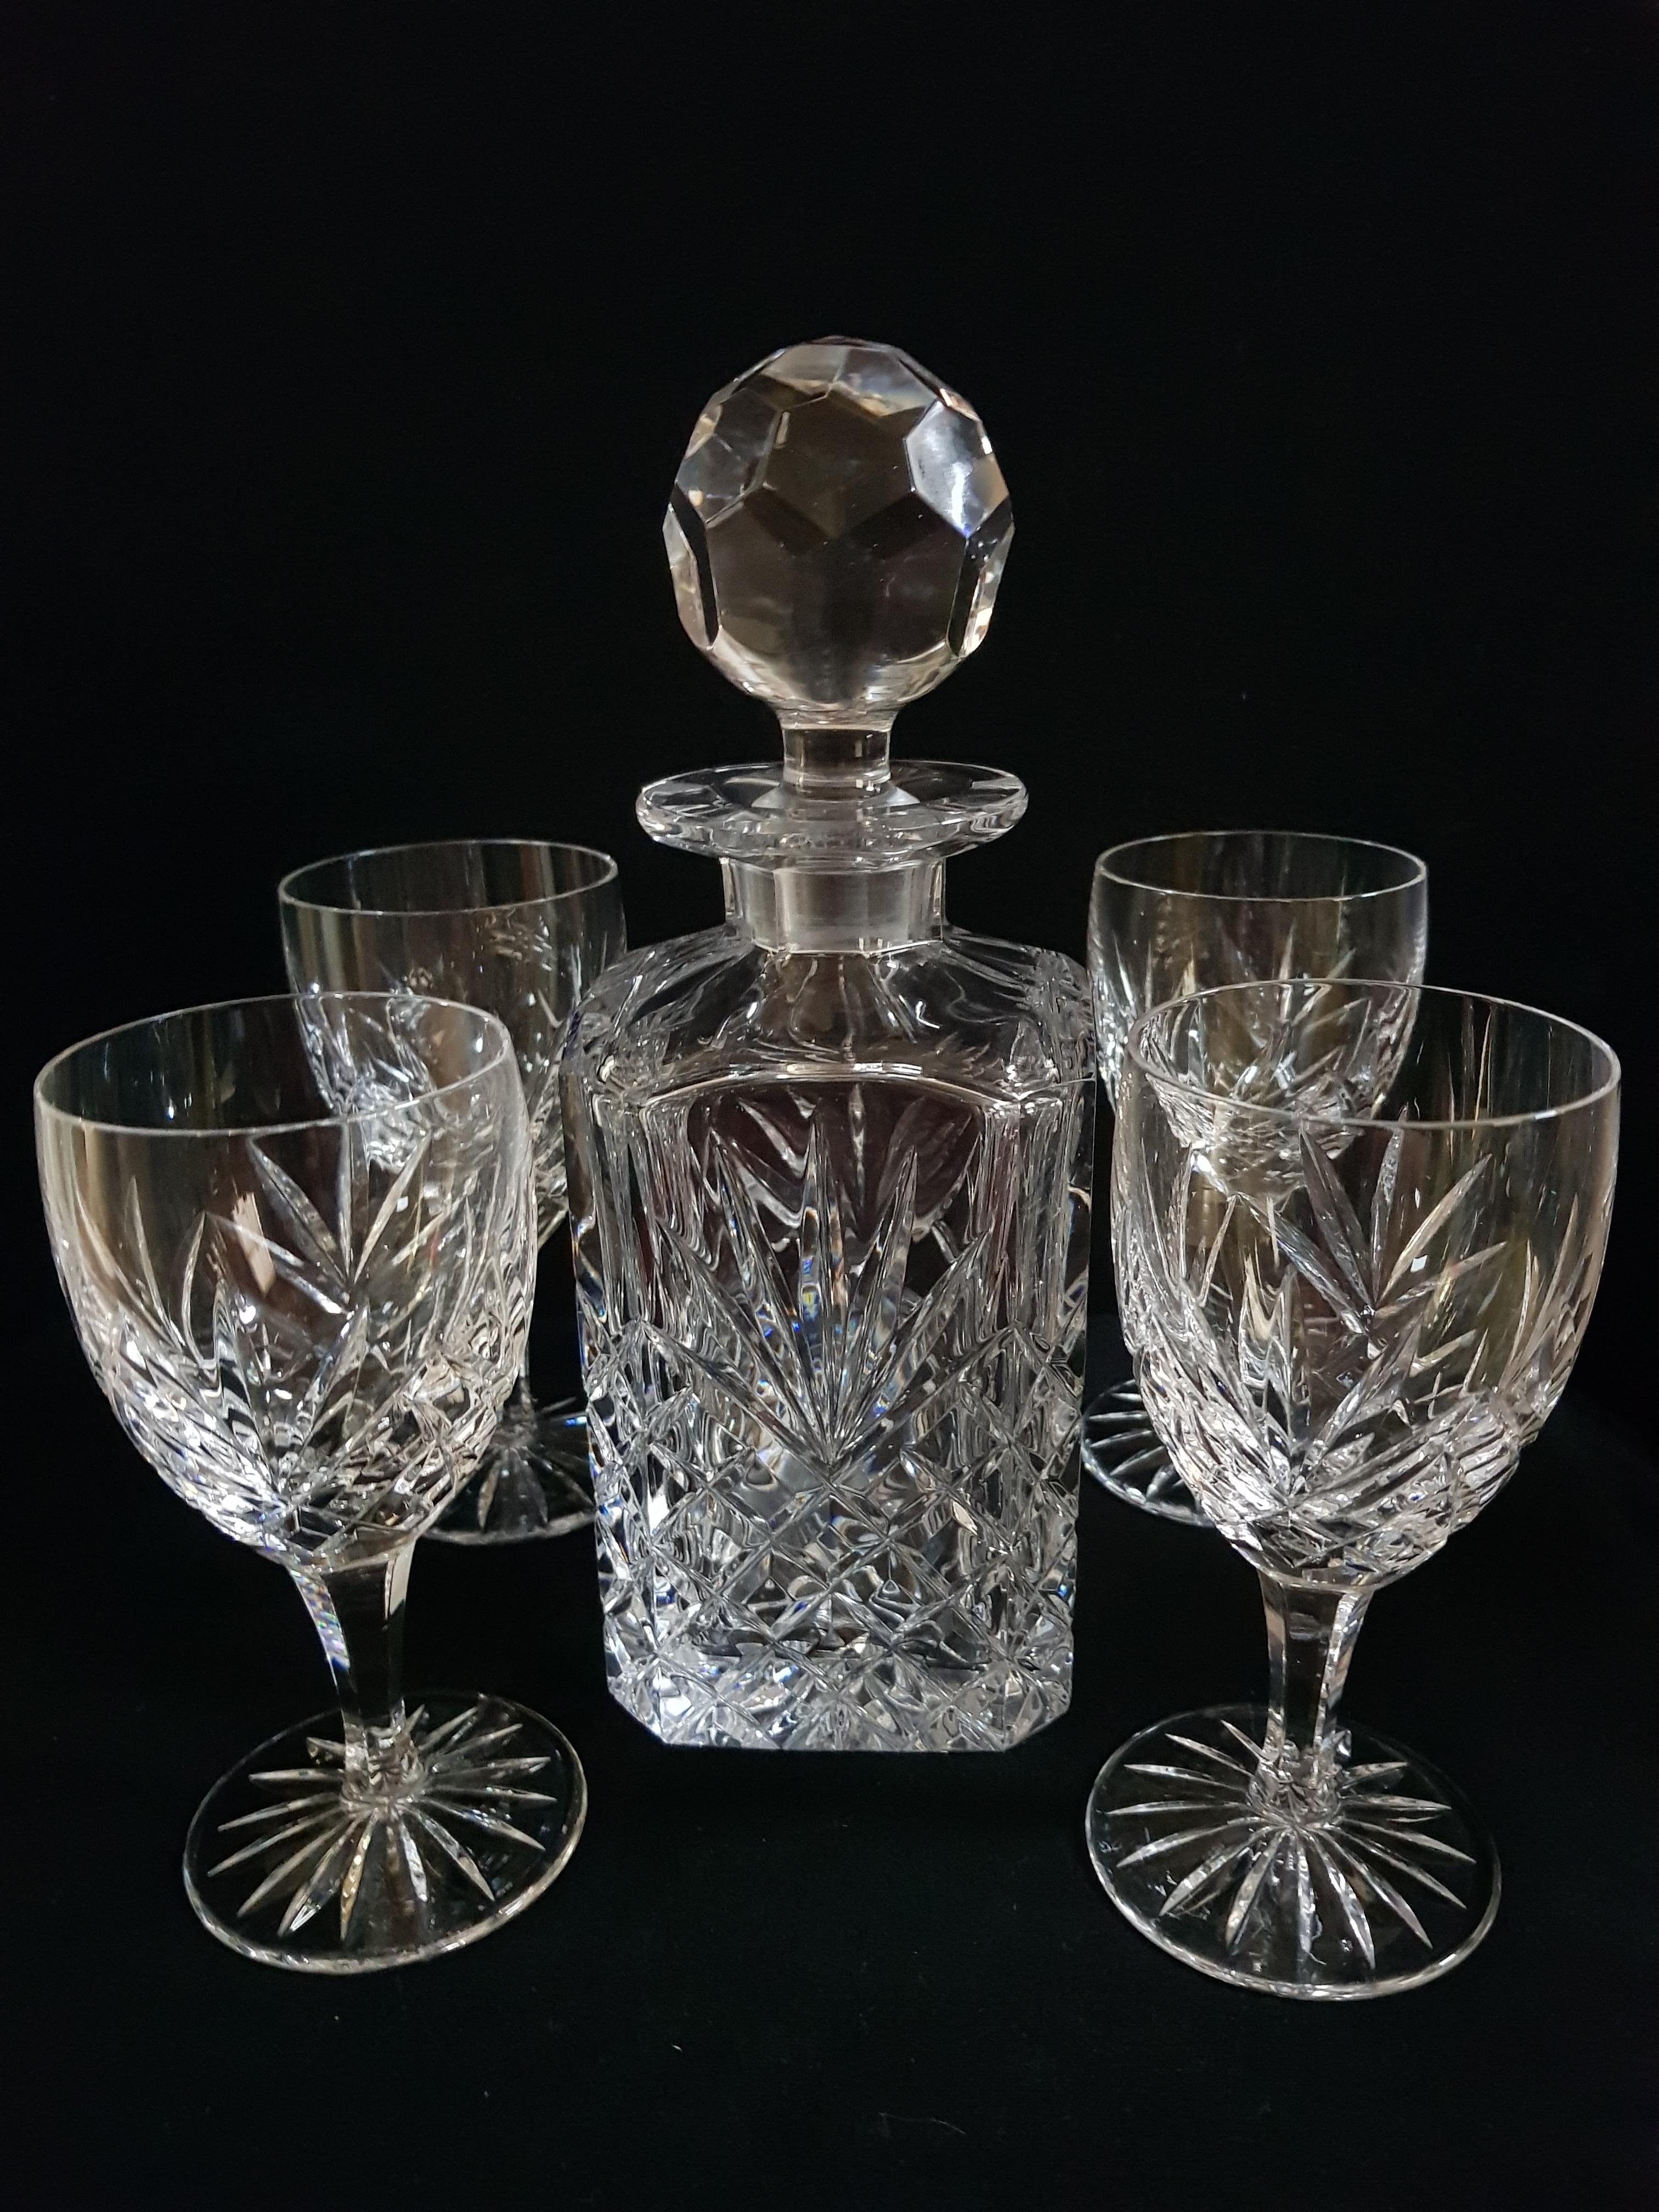 Beautiful vitange Bohemian brilliant cut crystal drinking set, decanter and stopper and 4 glasses brilliant condition.